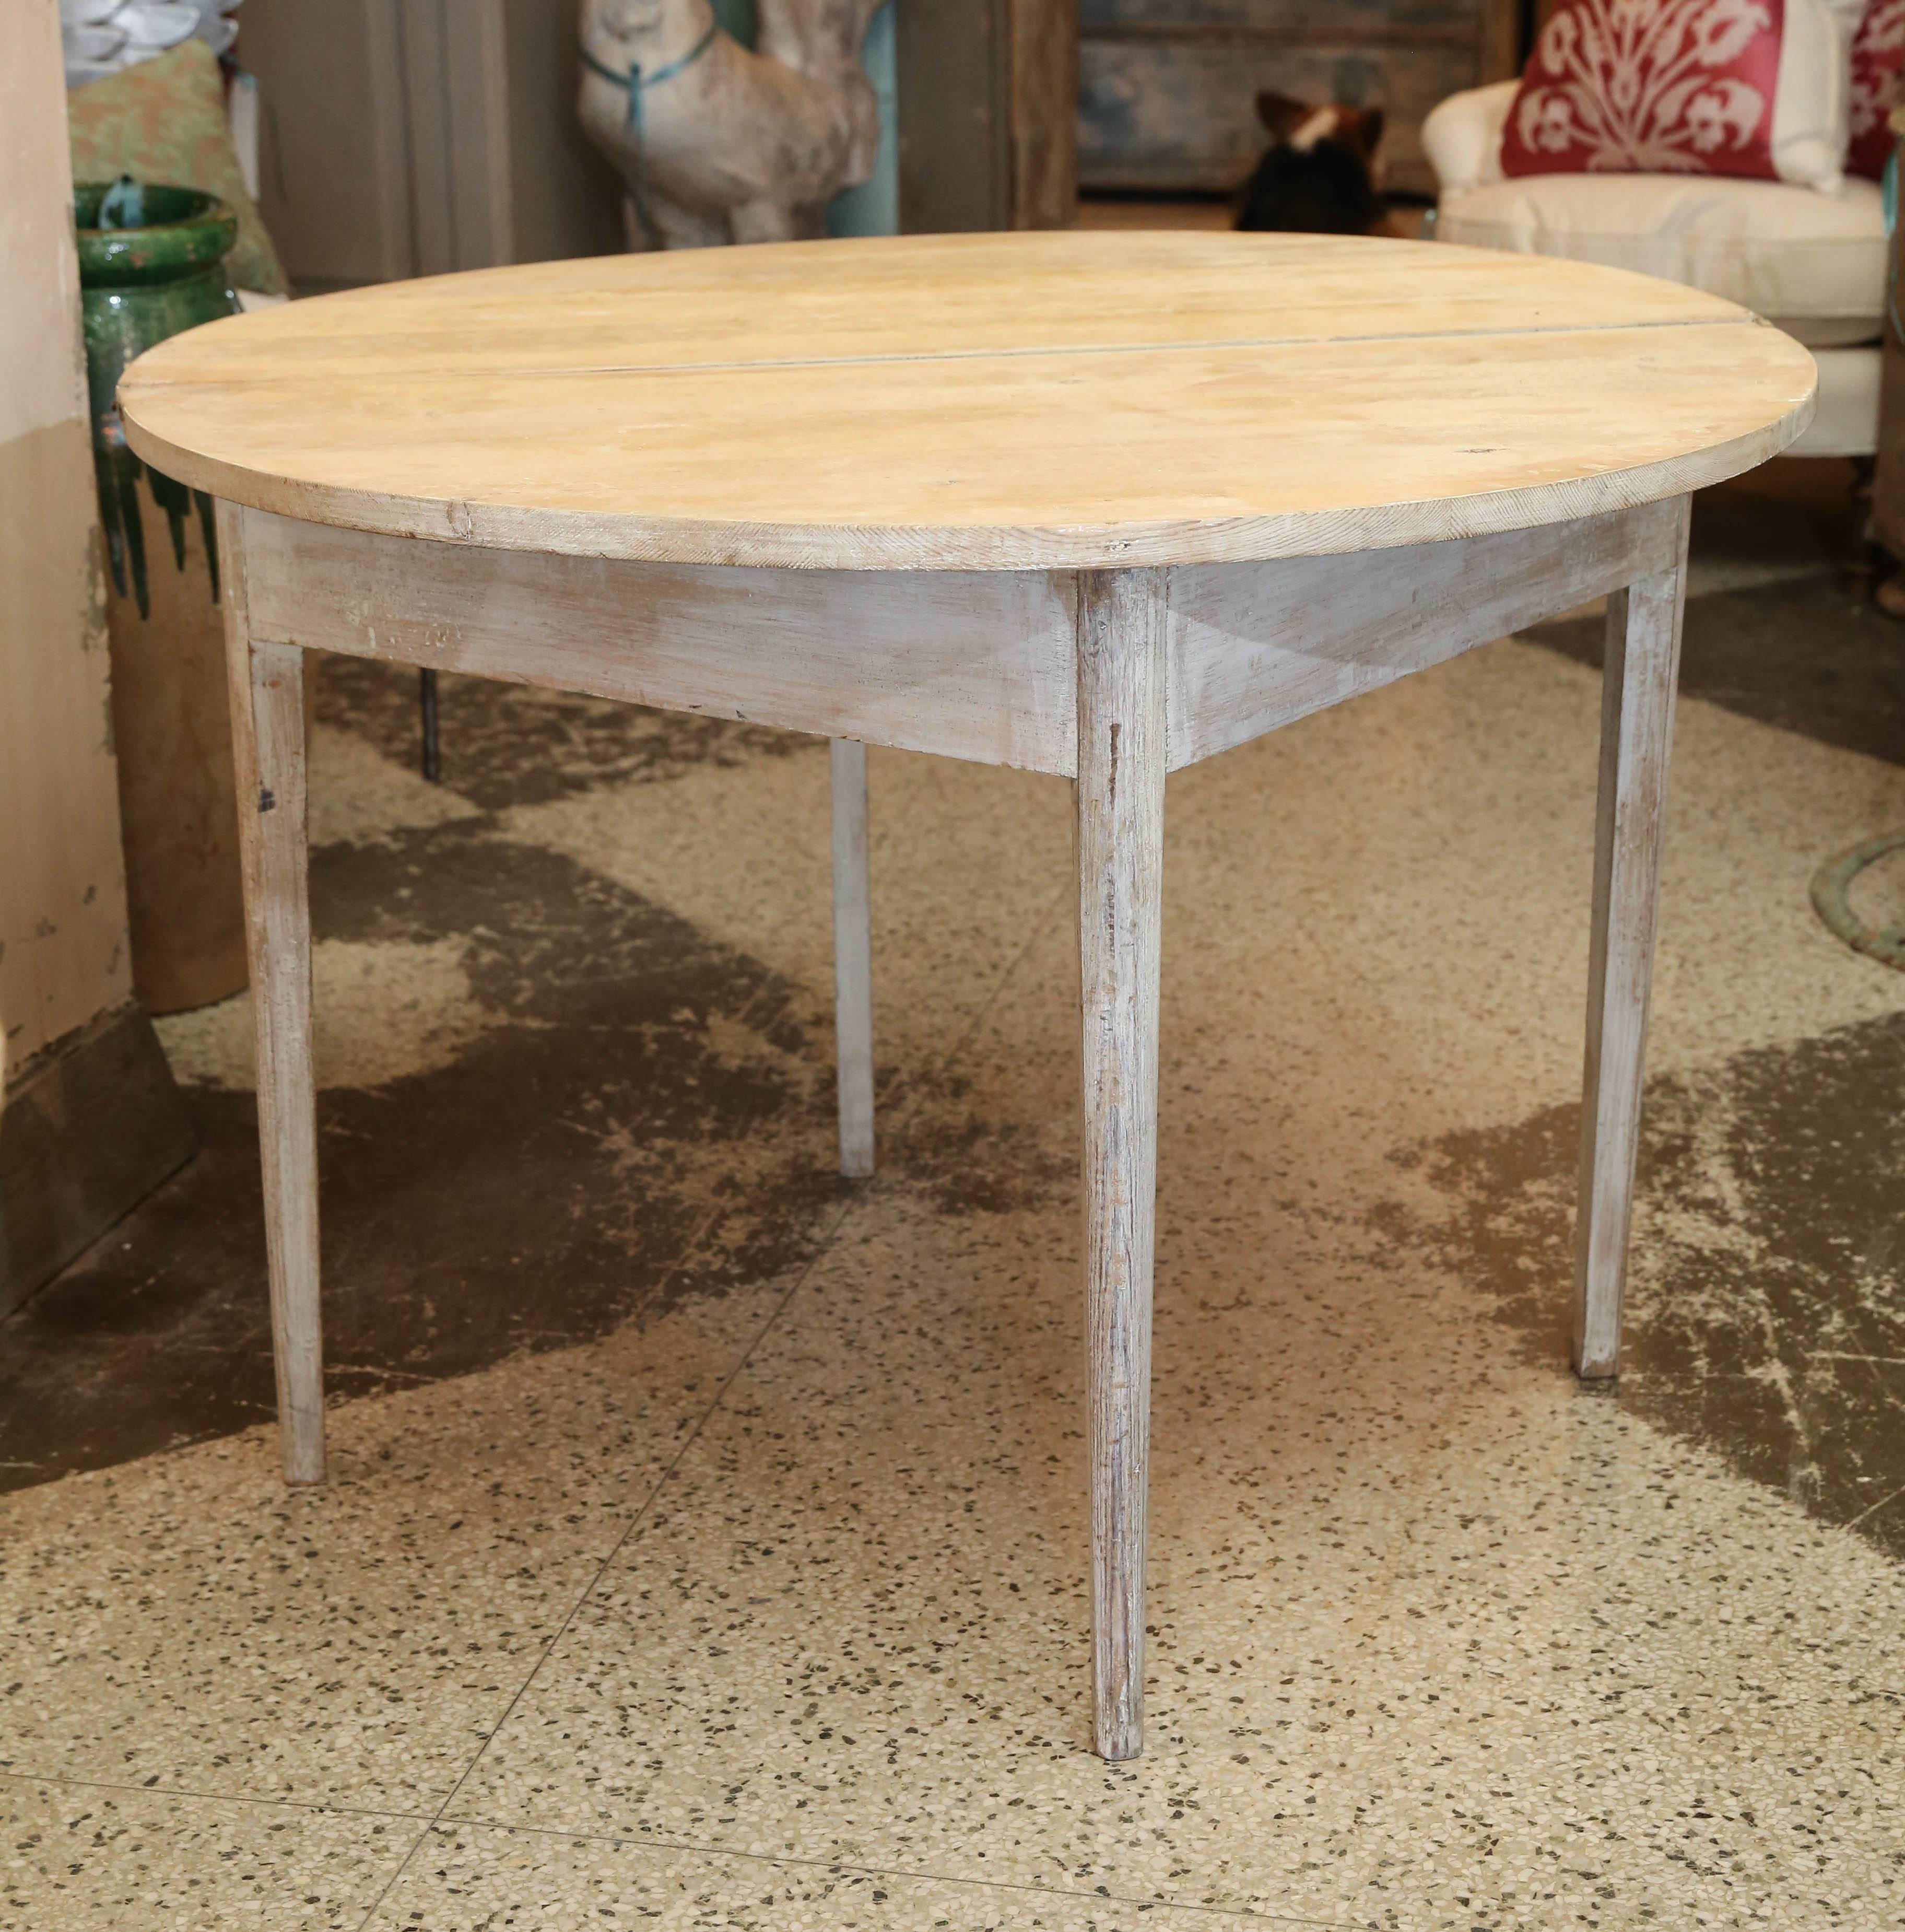 Painted folding demi-lune with flip top, becomes round table. Scraped finish. 29.5